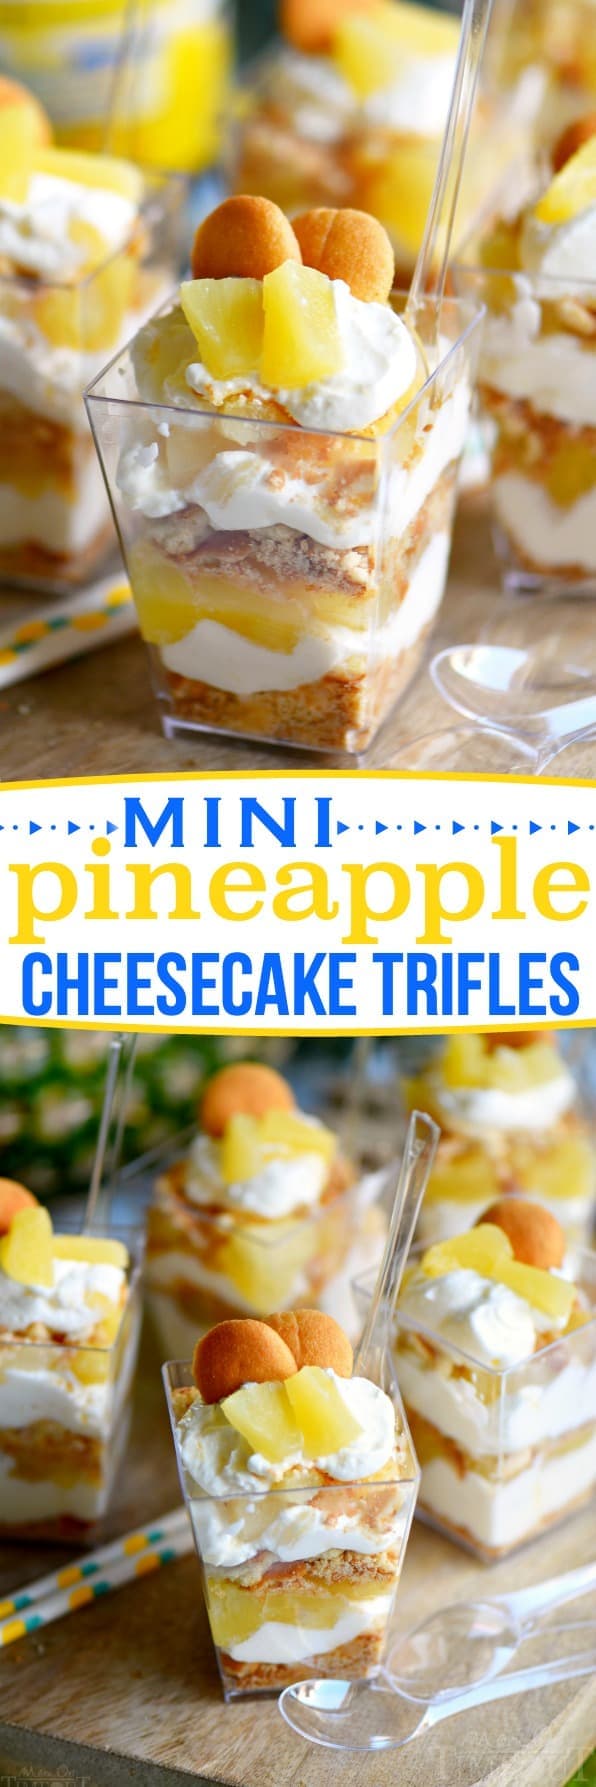 These Mini Pineapple Cheesecake Trifles are loaded with pineapple flavor! Perfect for an after-school snack, dessert, or party! // Mom On Timeout #pineapple #SharetheSunshine #ad